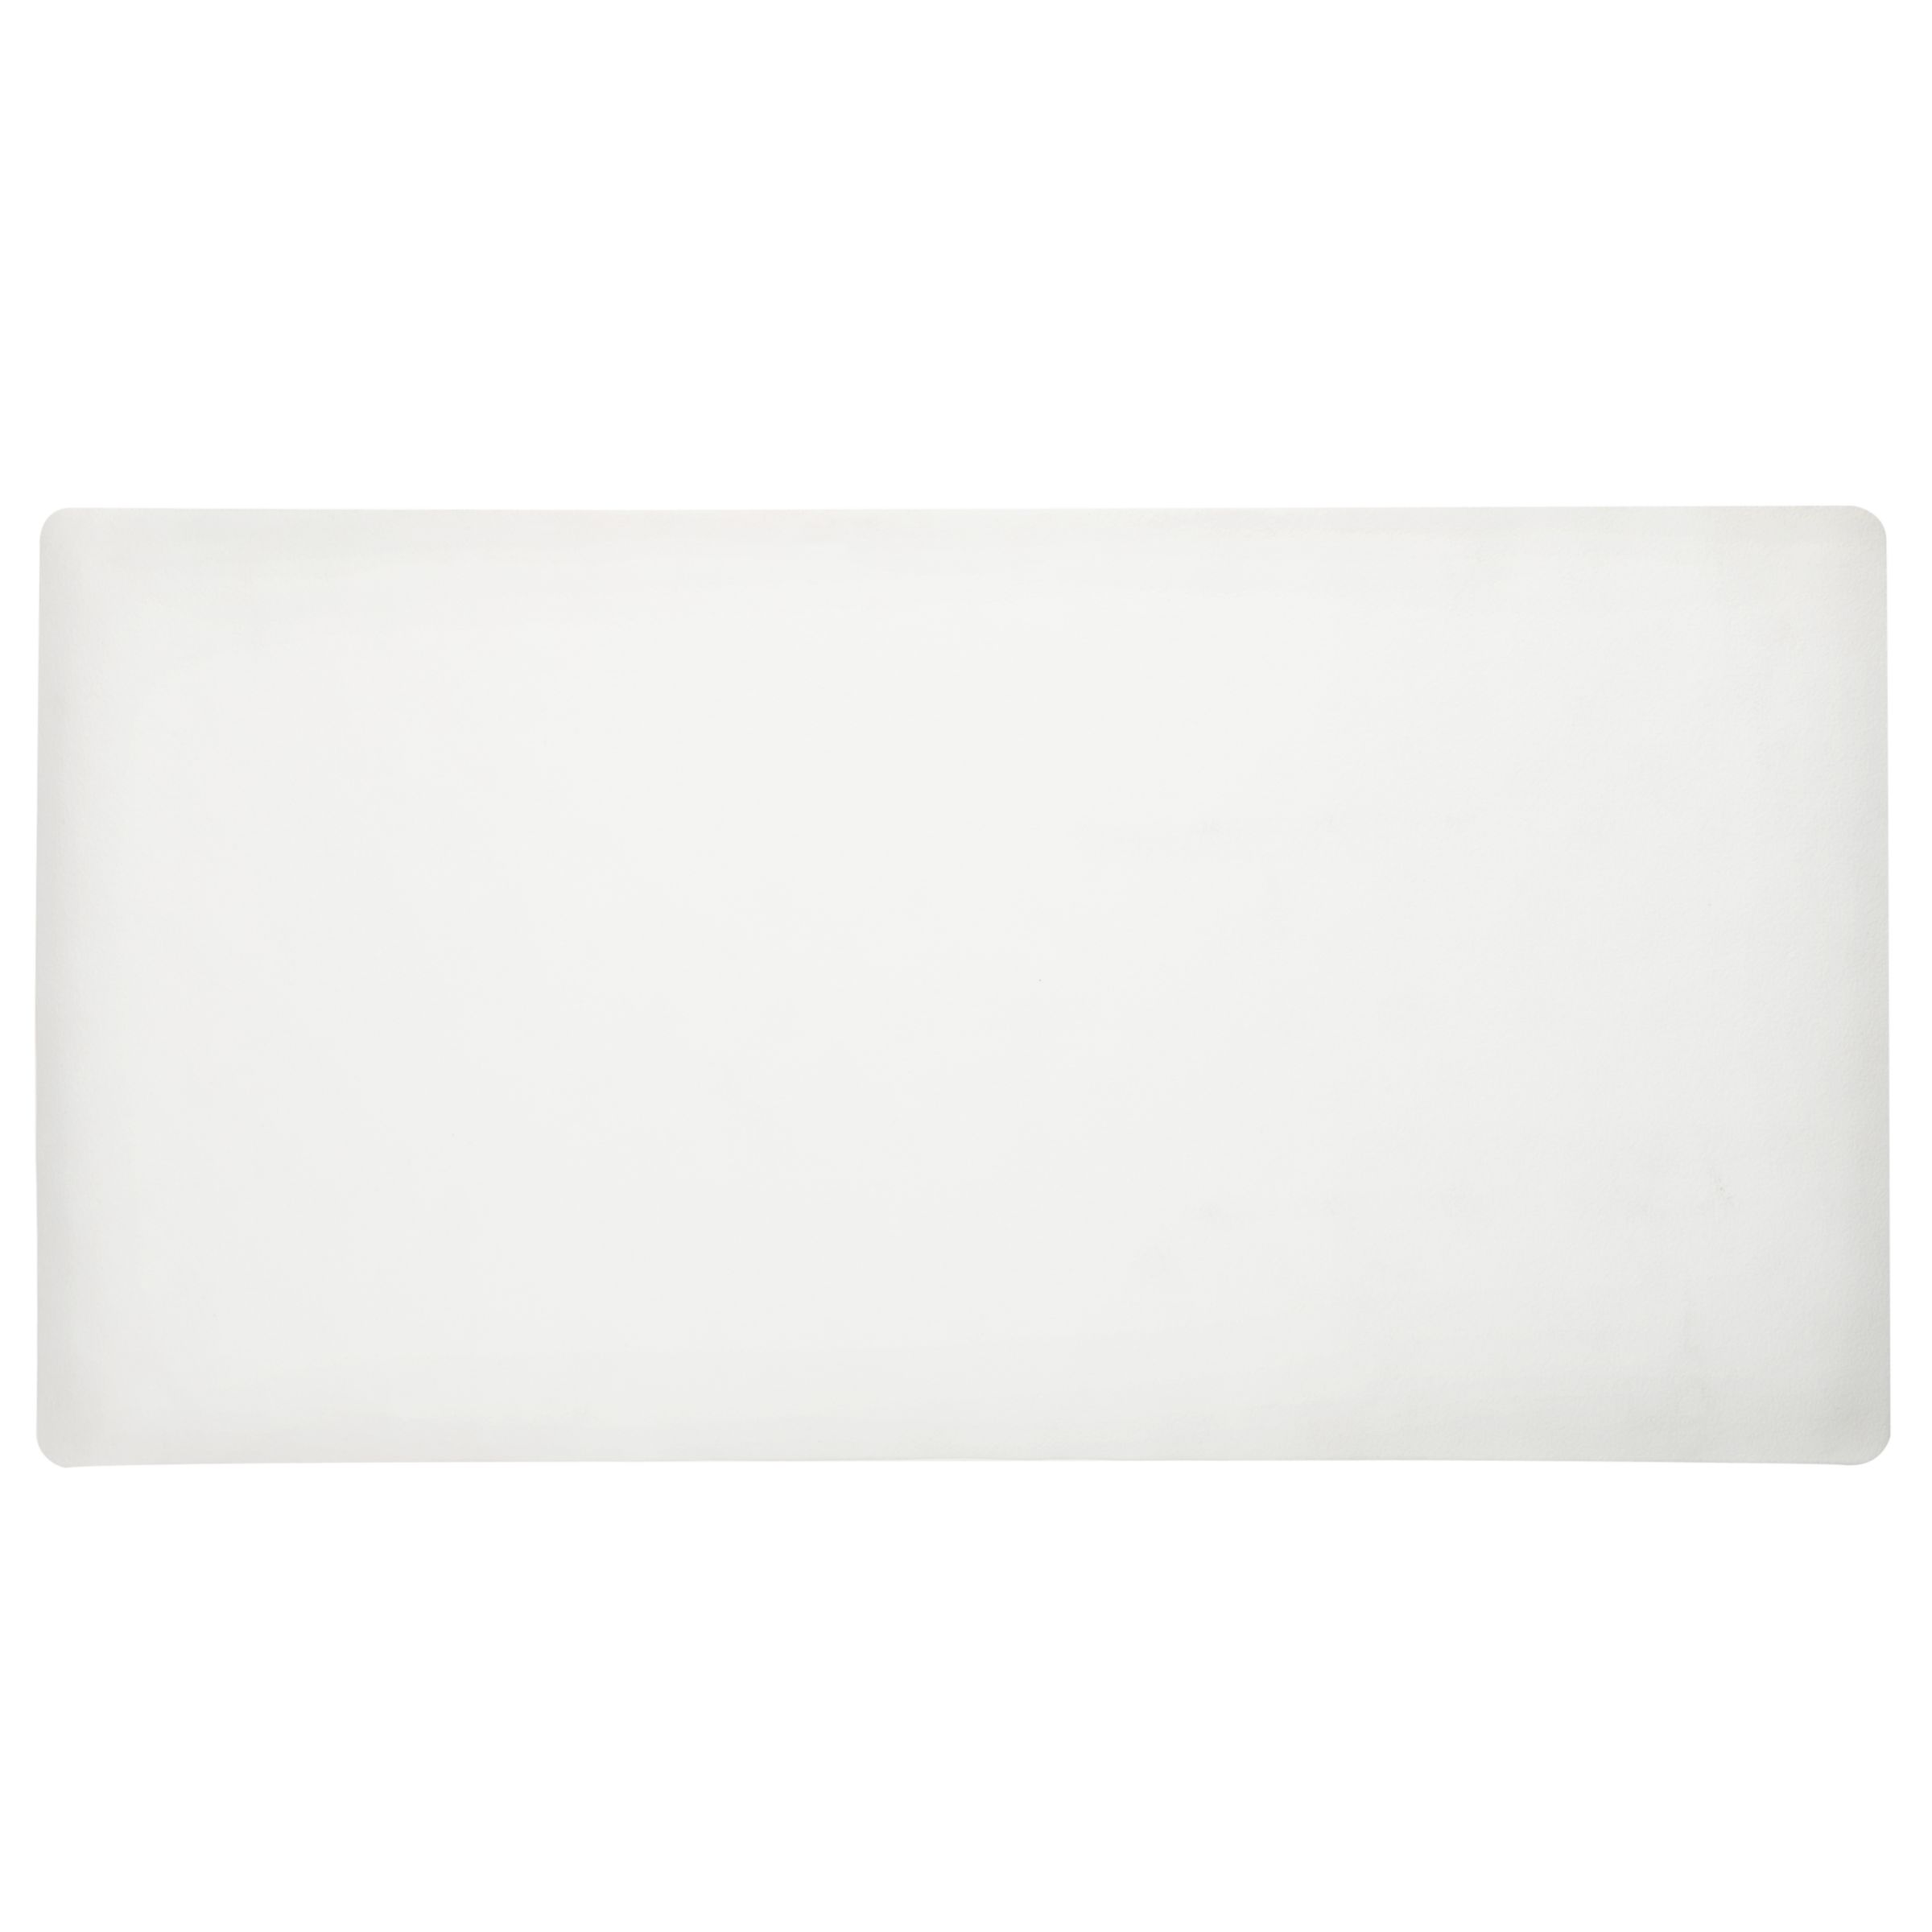 Image of John Lewis and Partners Baby and Toddler Bath Mat